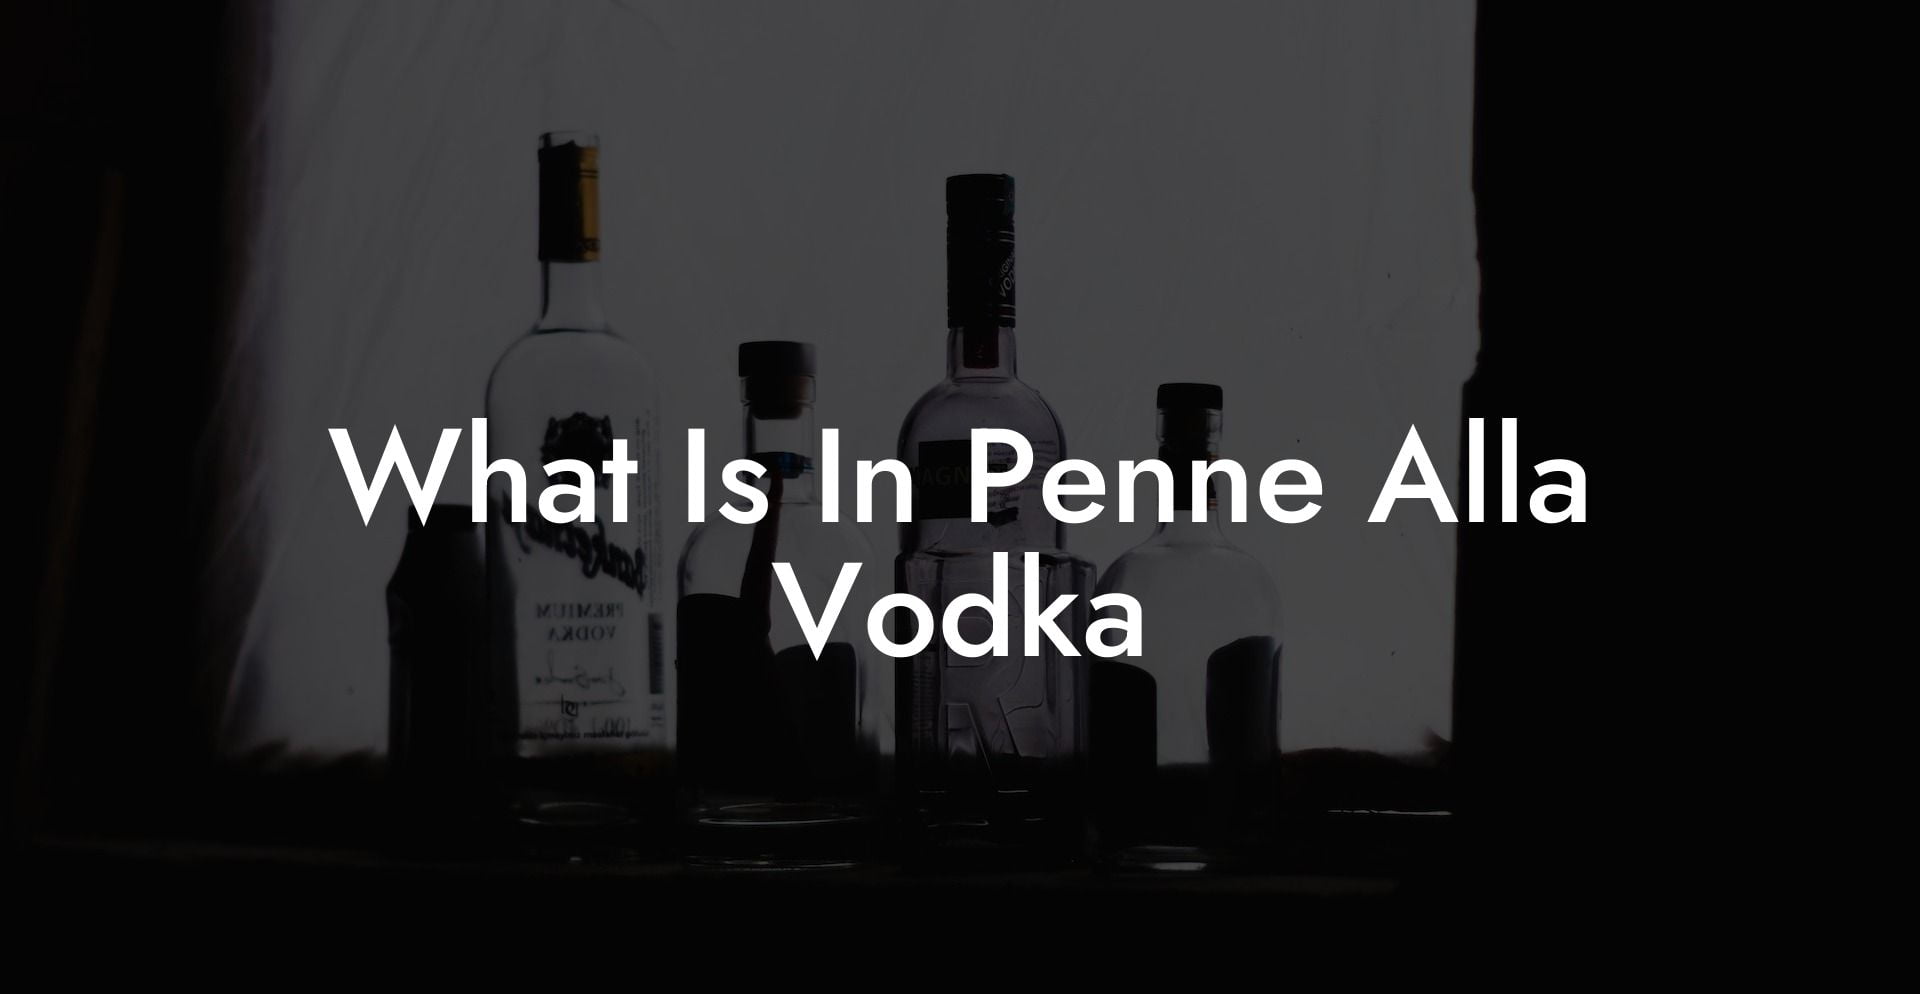 What Is In Penne Alla Vodka